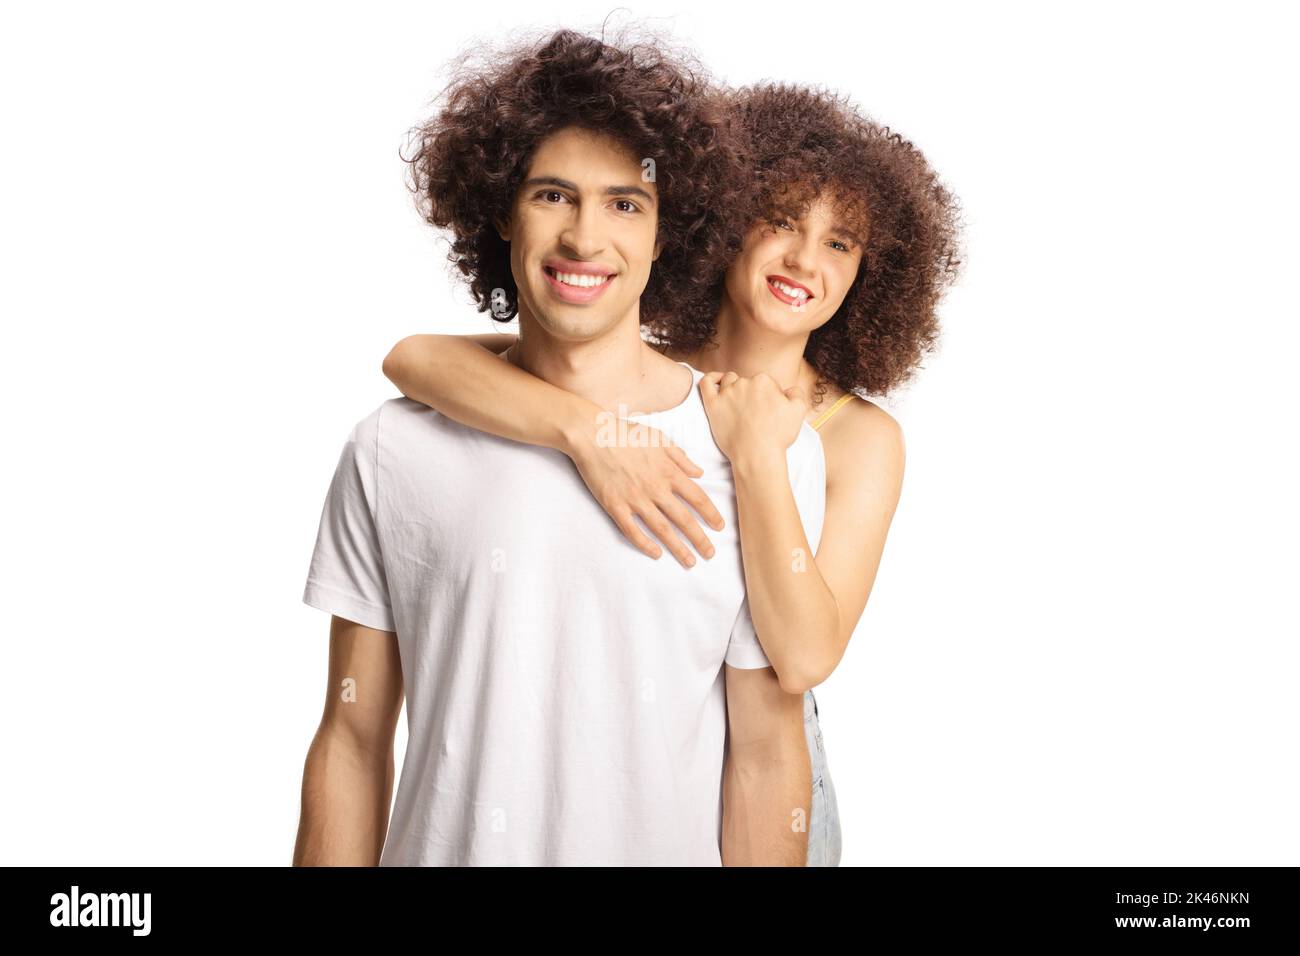 Cute couple with curly hair in embrace isolated on white background Stock Photo